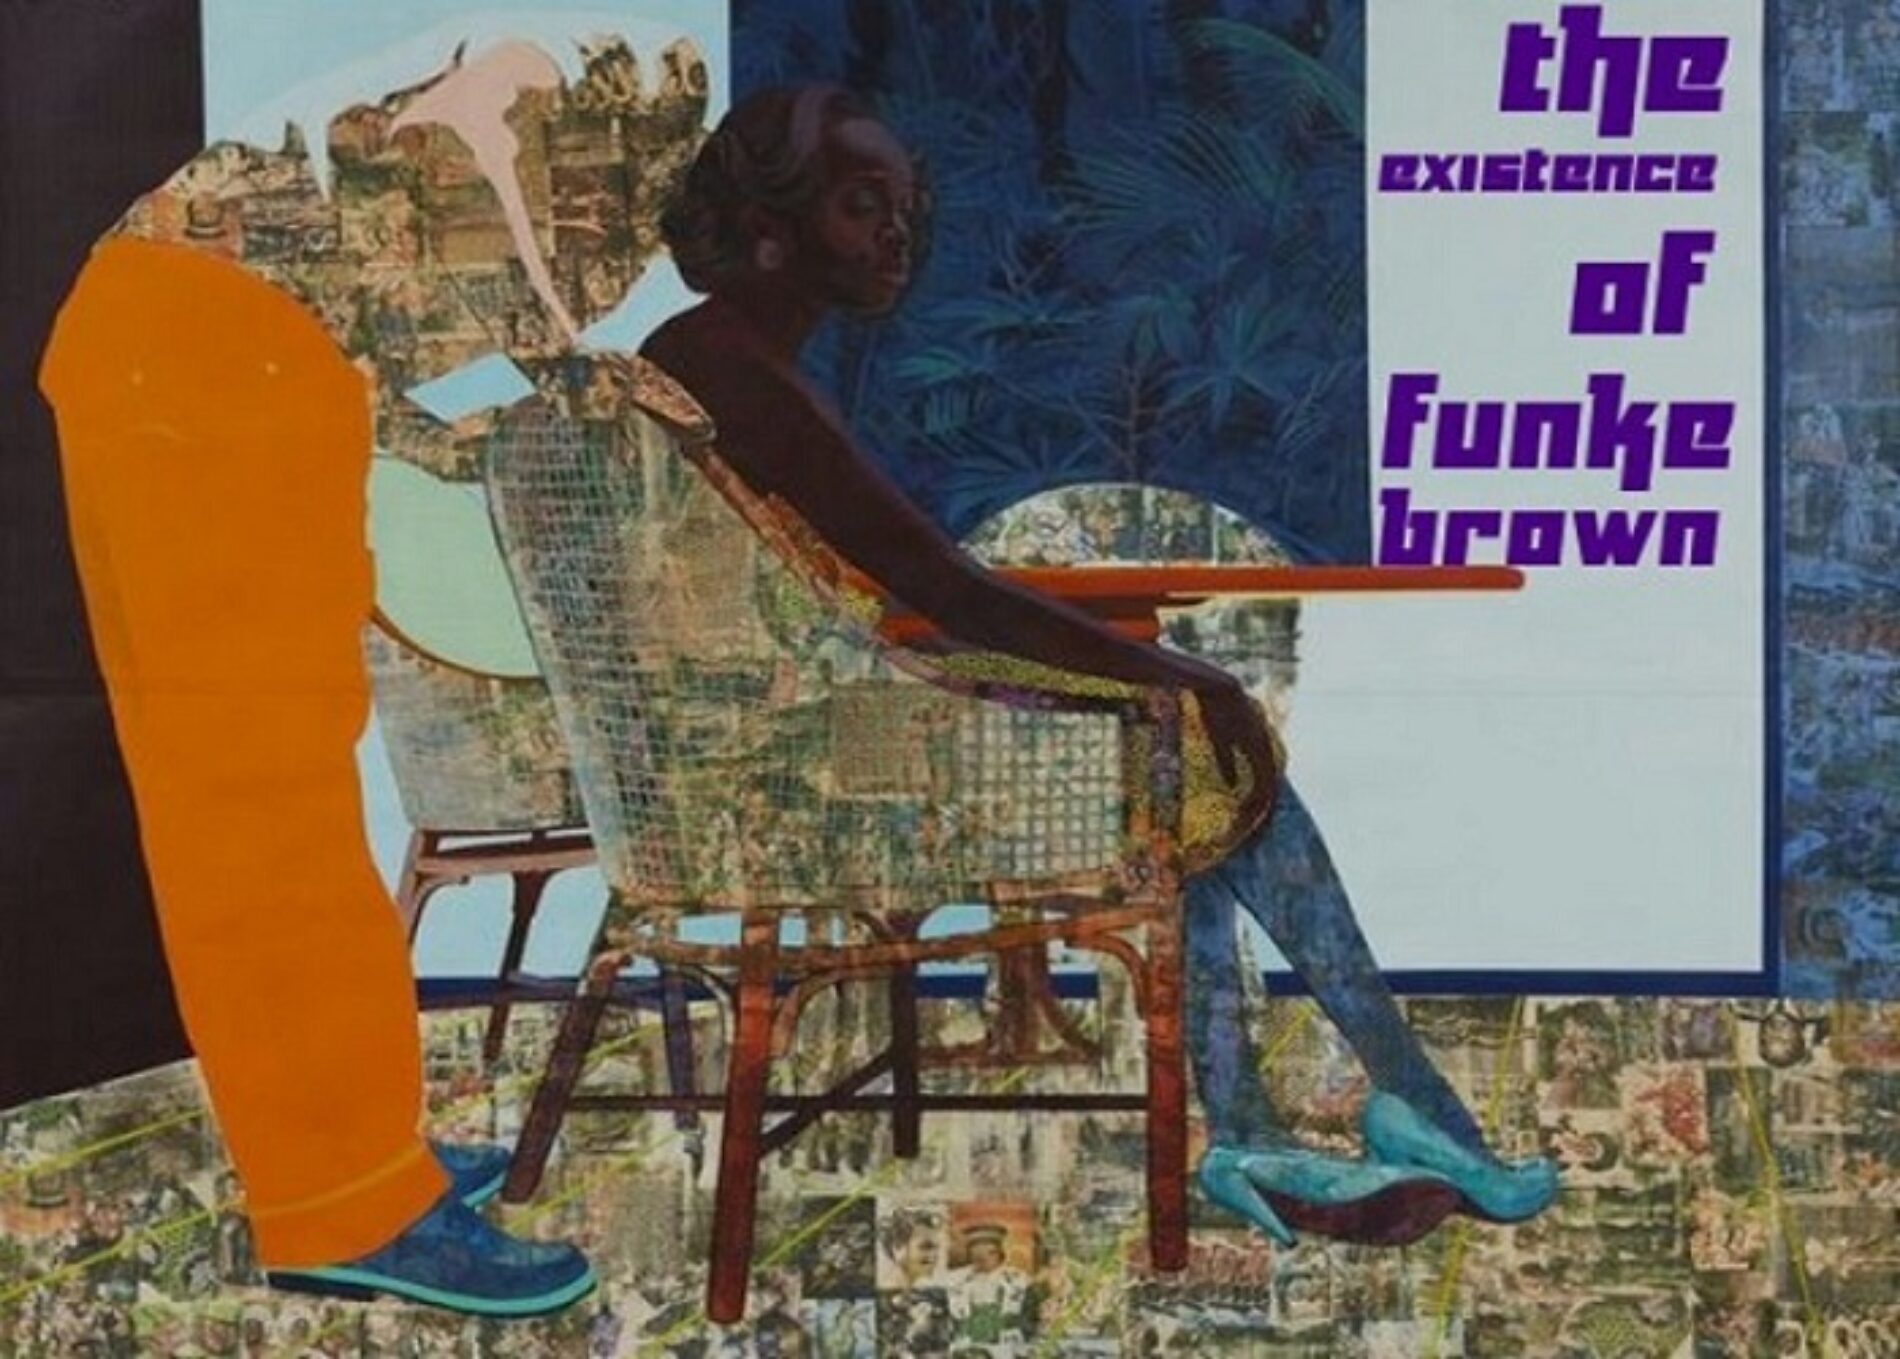 THE EXISTENCE OF FUNKE BROWN (Episode Three)